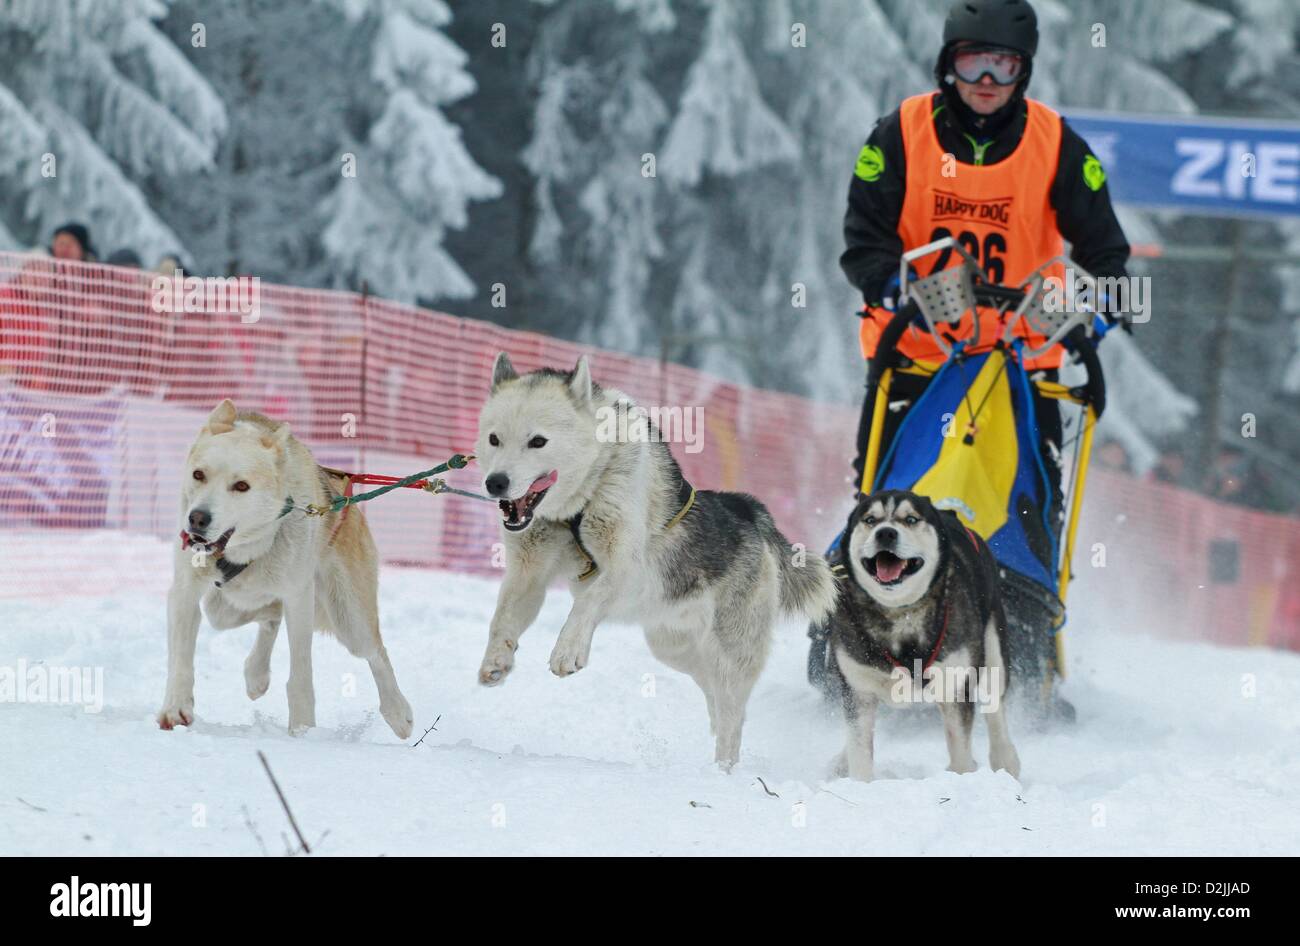 Benneckenstein, Germany. 26th January 2013. Raimund Kupka and his sled dogs compete in the sled dog race in Benneckenstein, Germany, 26 January 2013. 35 participants have registered for the sled dog race. Photo: MATTHIAS BEIN/ Alamy Live News Stock Photo